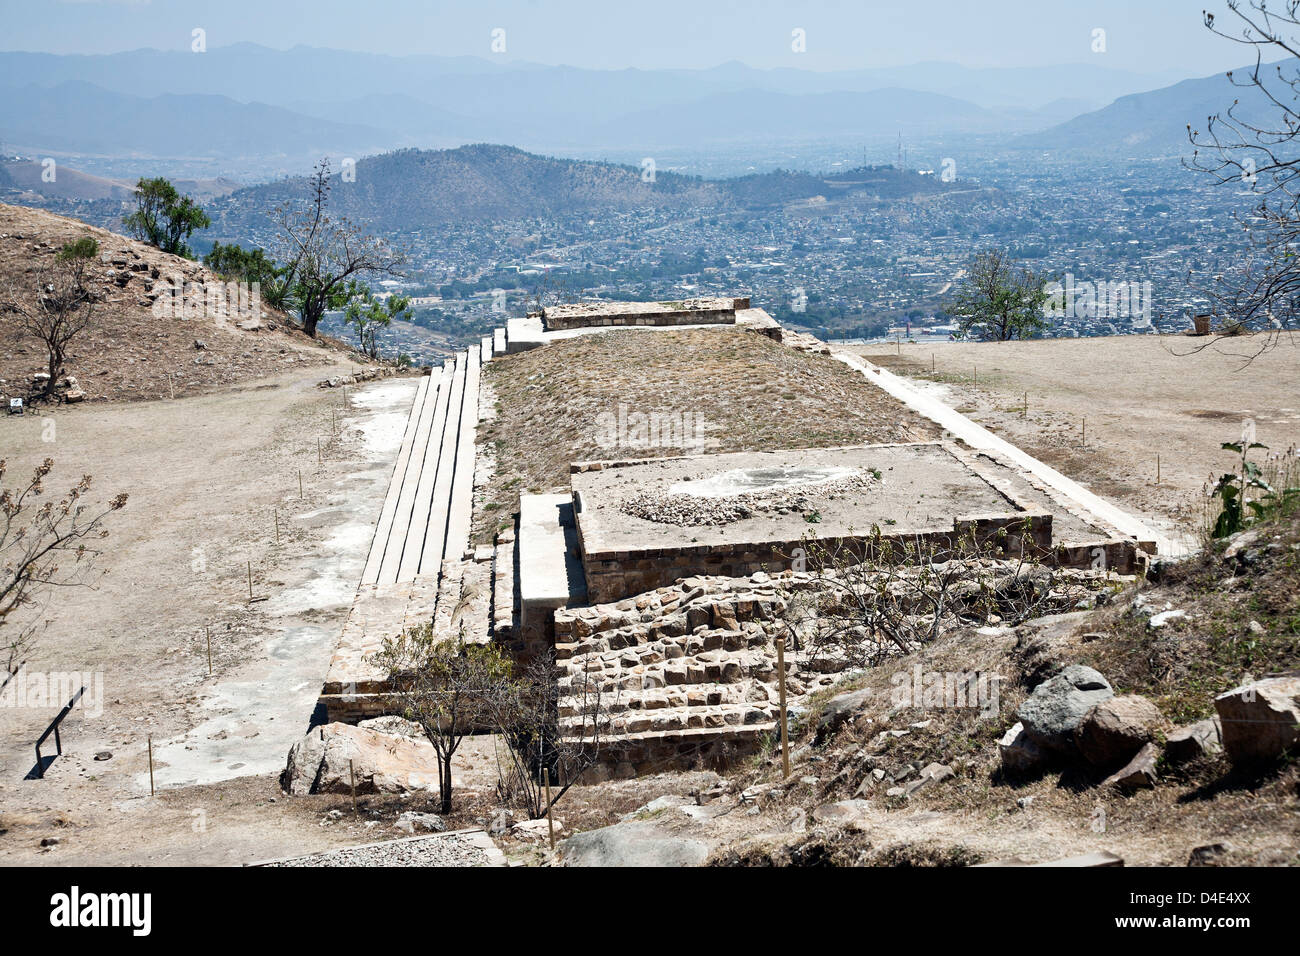 view looking down on long Building 8 at south side of mid level Plaza B in restored recently opened pre Columbian Atzompa ruins Stock Photo